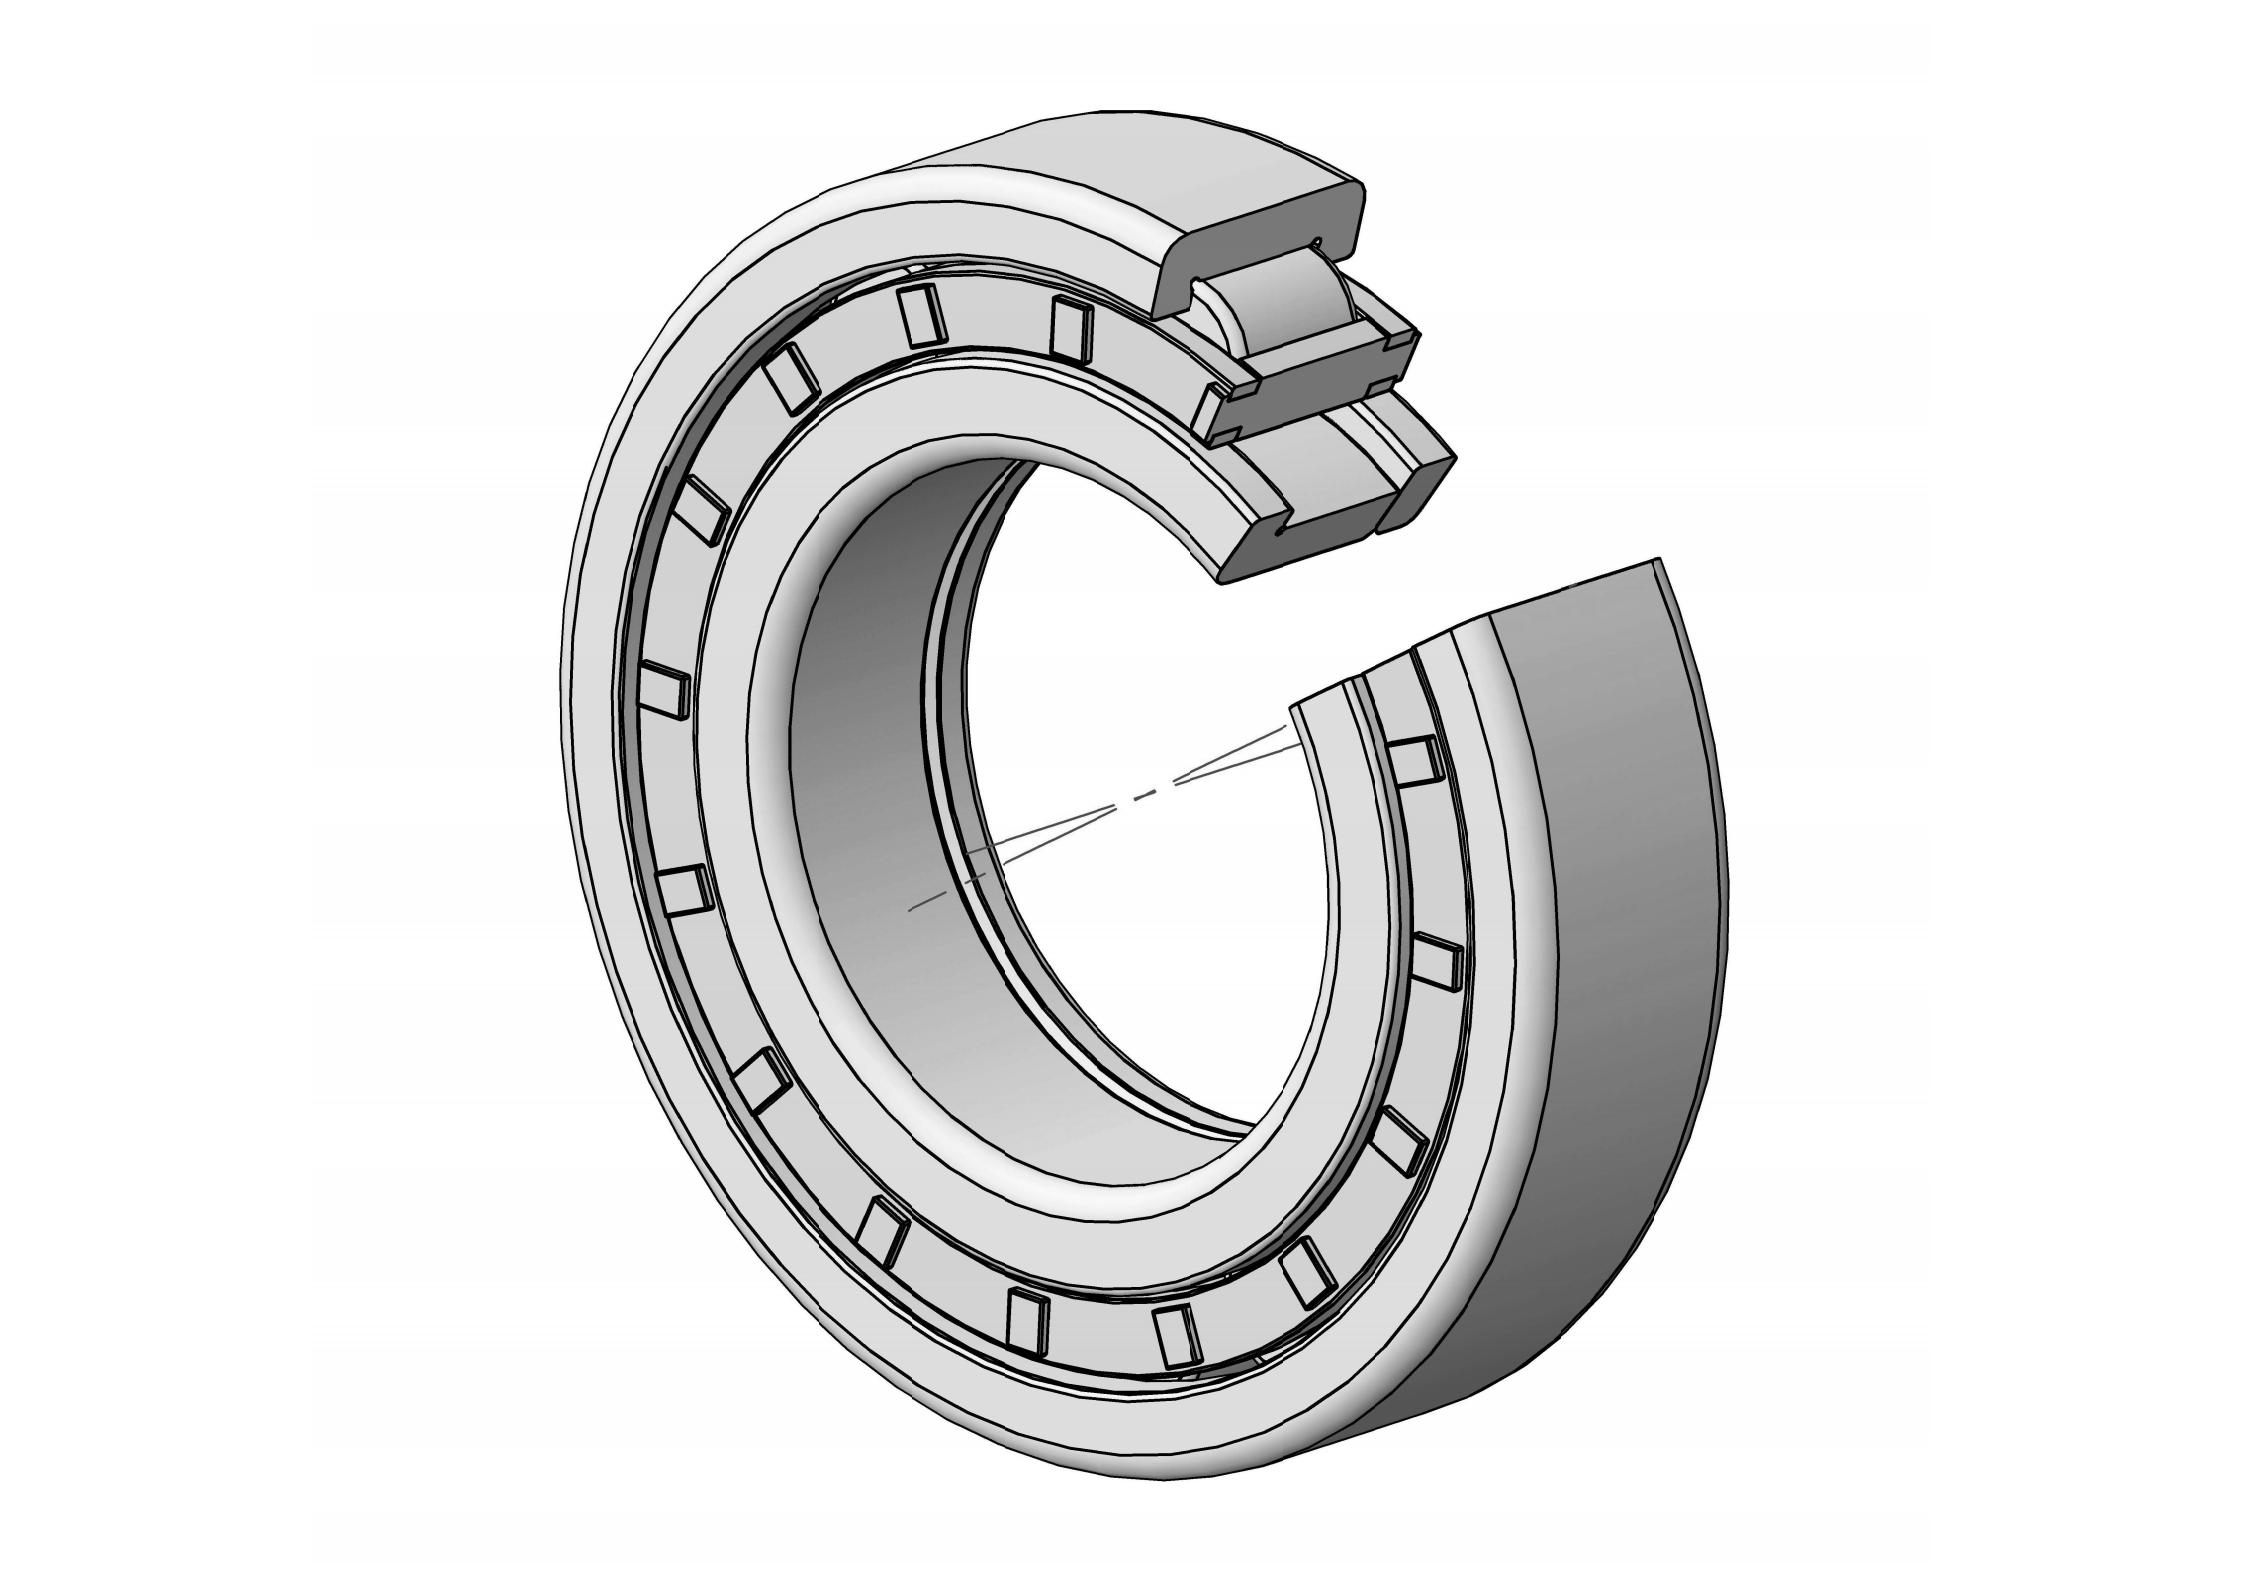 NUP330-EM Single Row Cylindrical roller bearing 